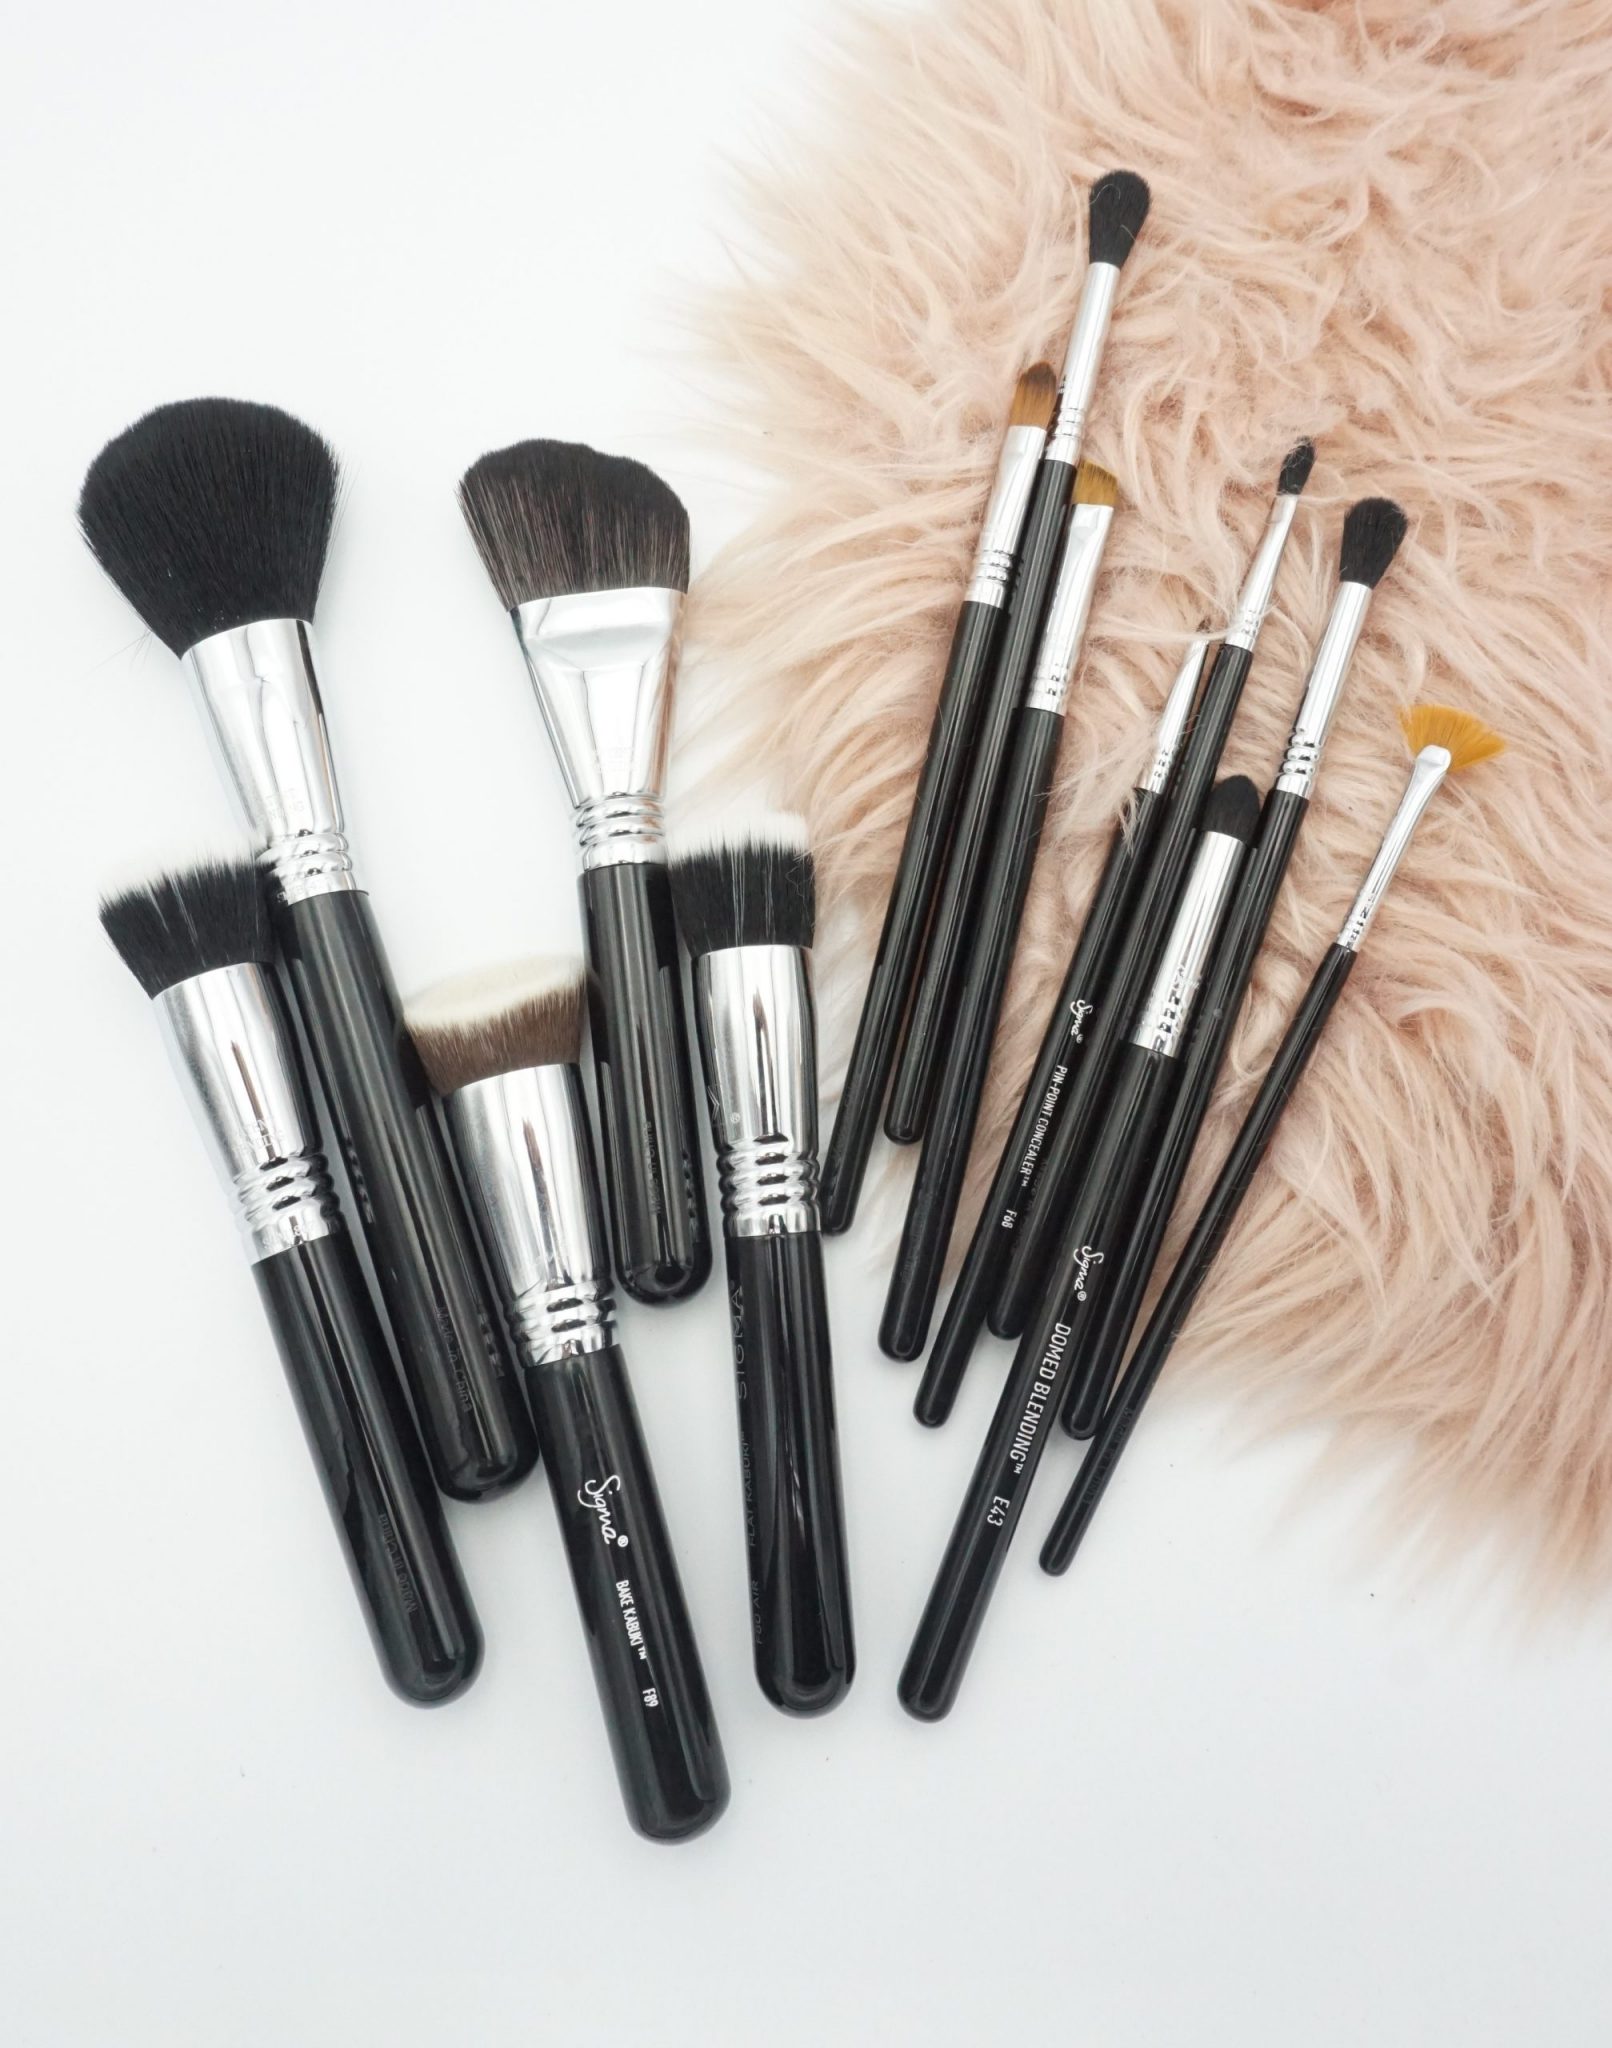 The Sigma Brushes I Own